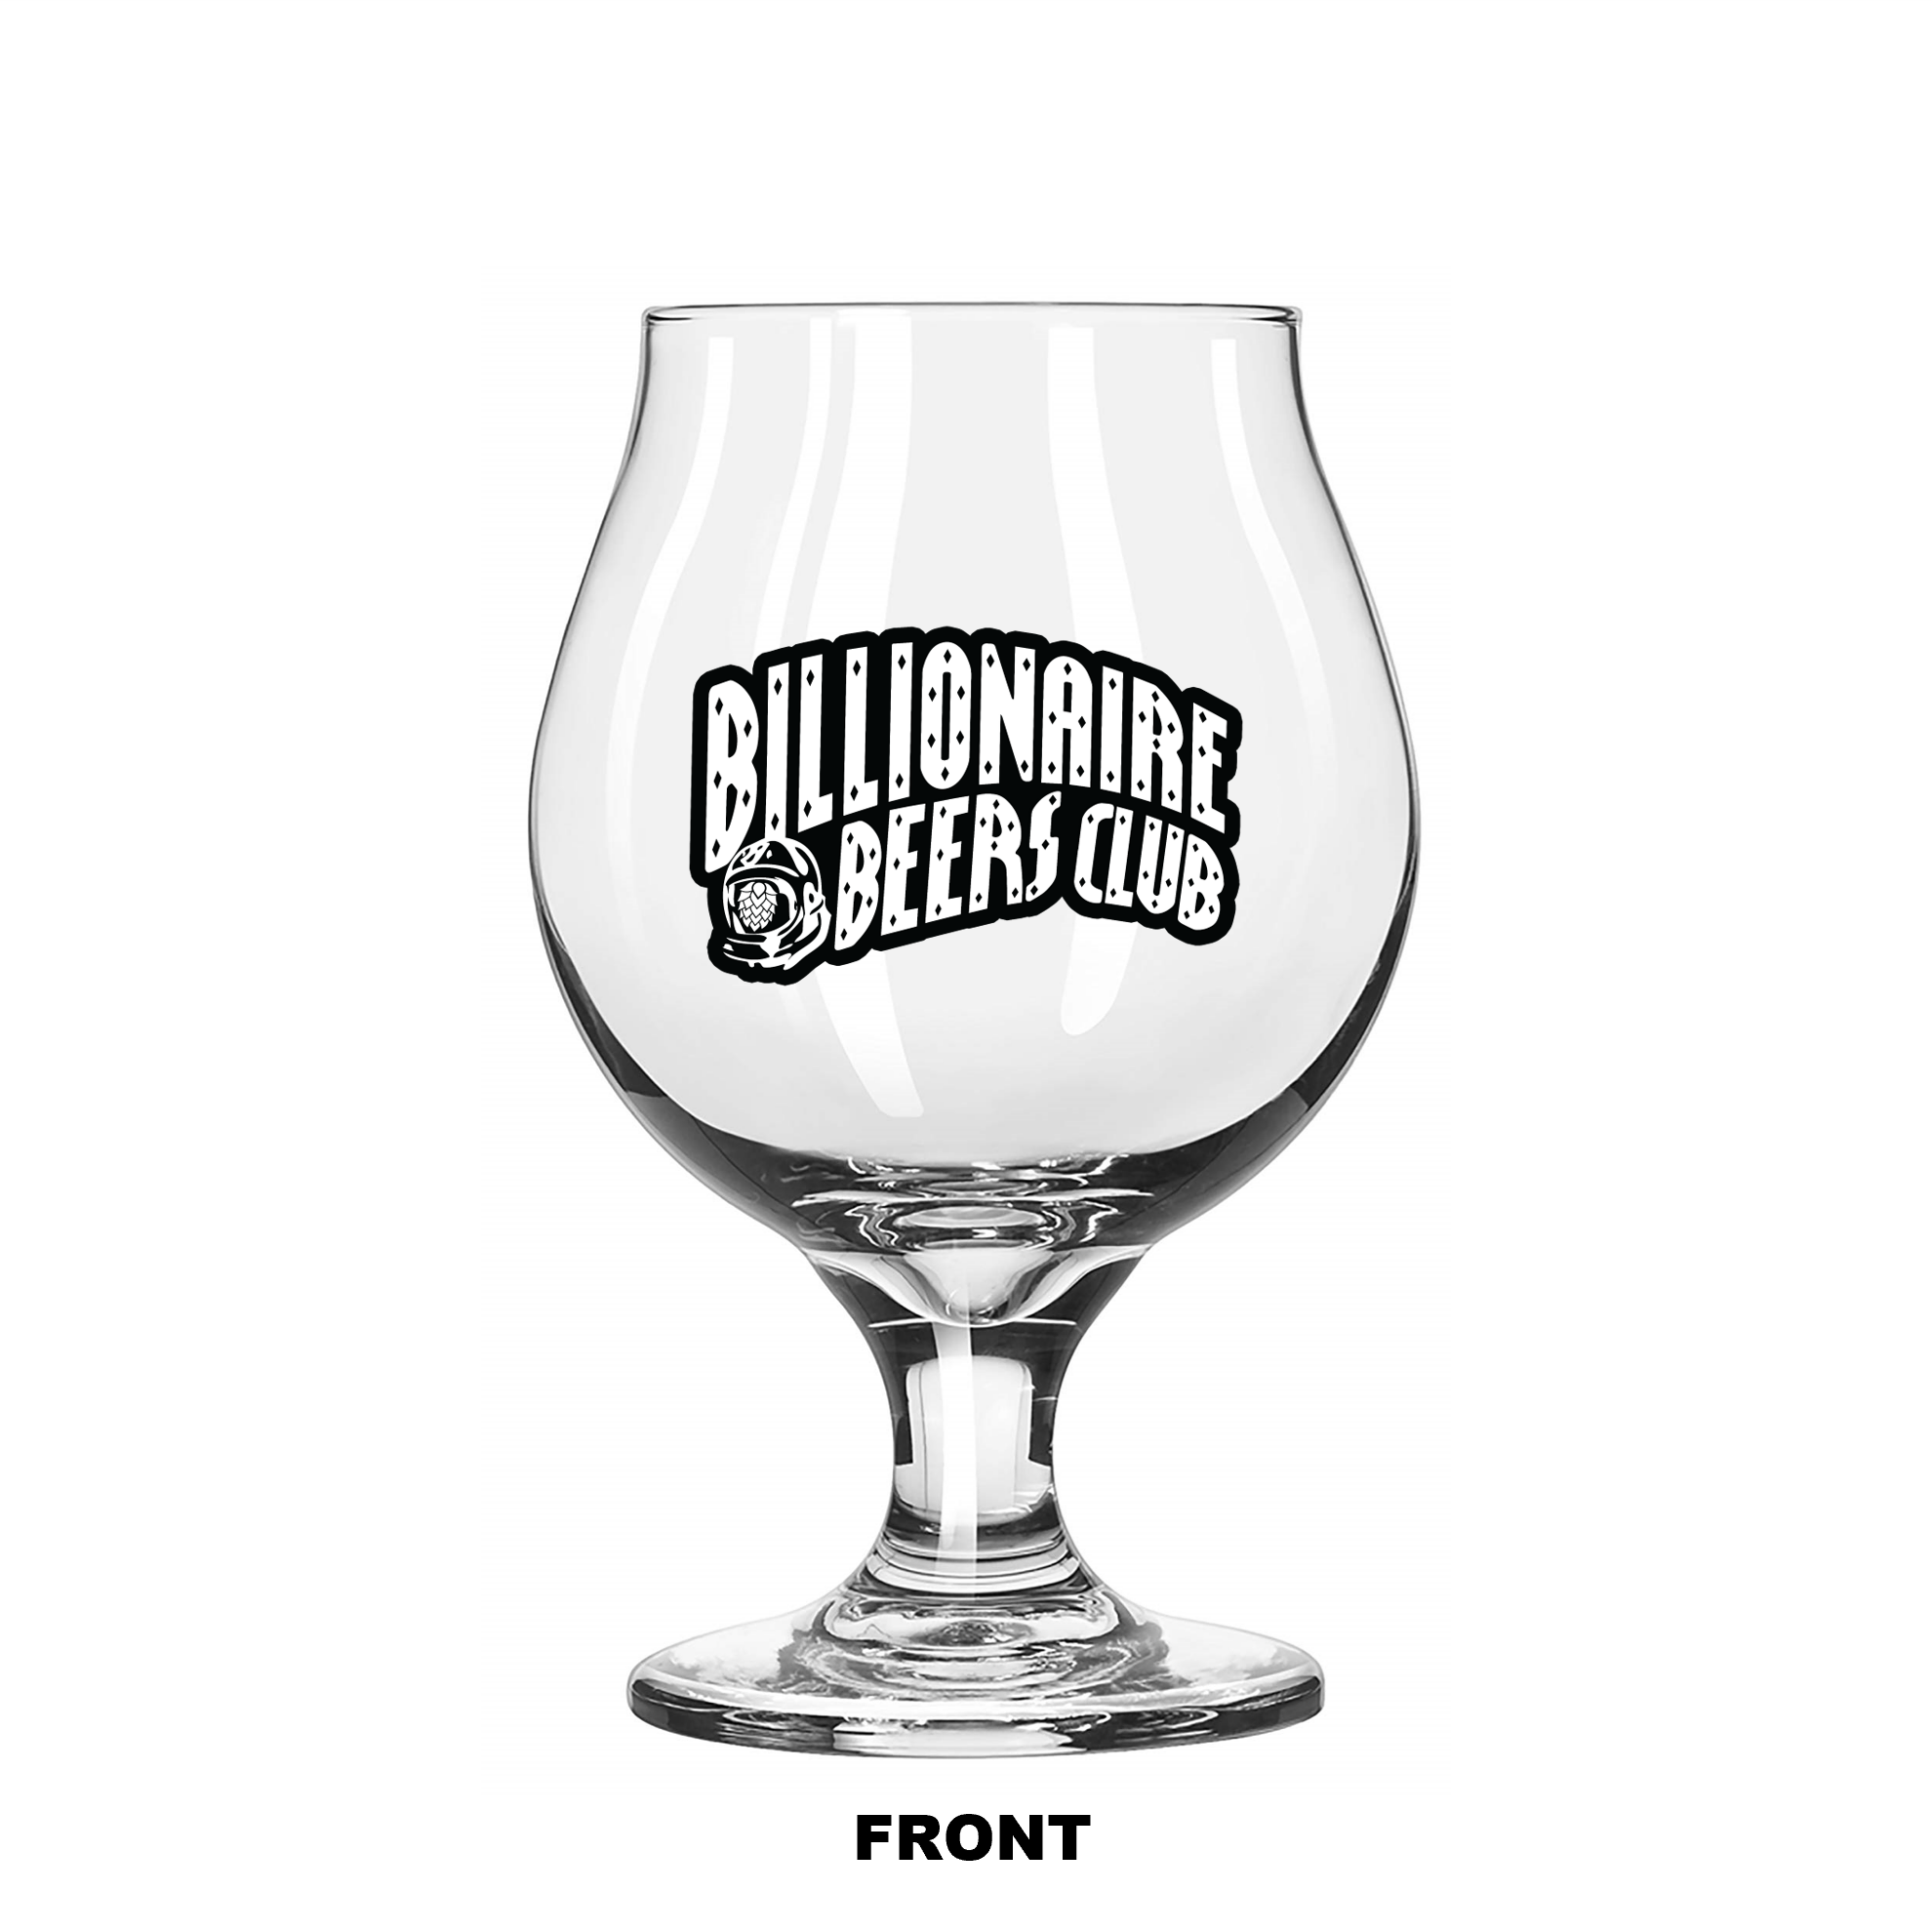 Single Product Image *LIMITED* “Billionaire Beers Club" 16oz Belgian glass (MAX 1PP)